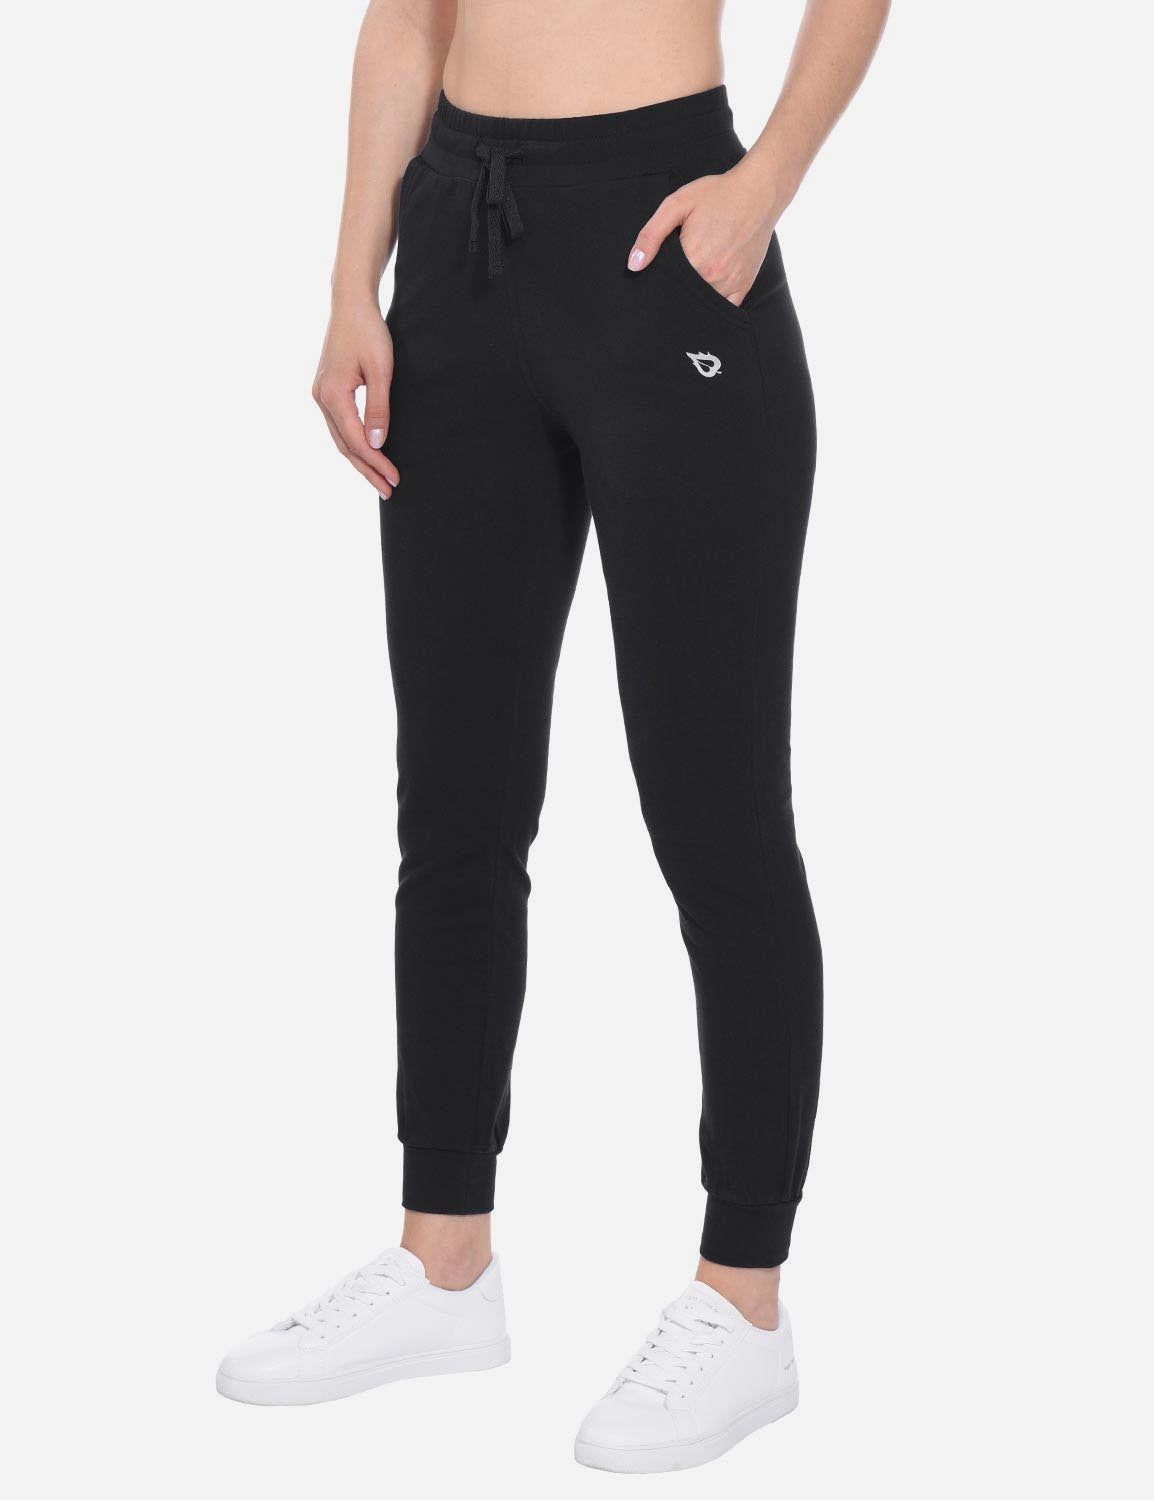 Baleaf Women's Cotton Comfy Pocketed & Tapered Weekend Joggers abh103 Black Side